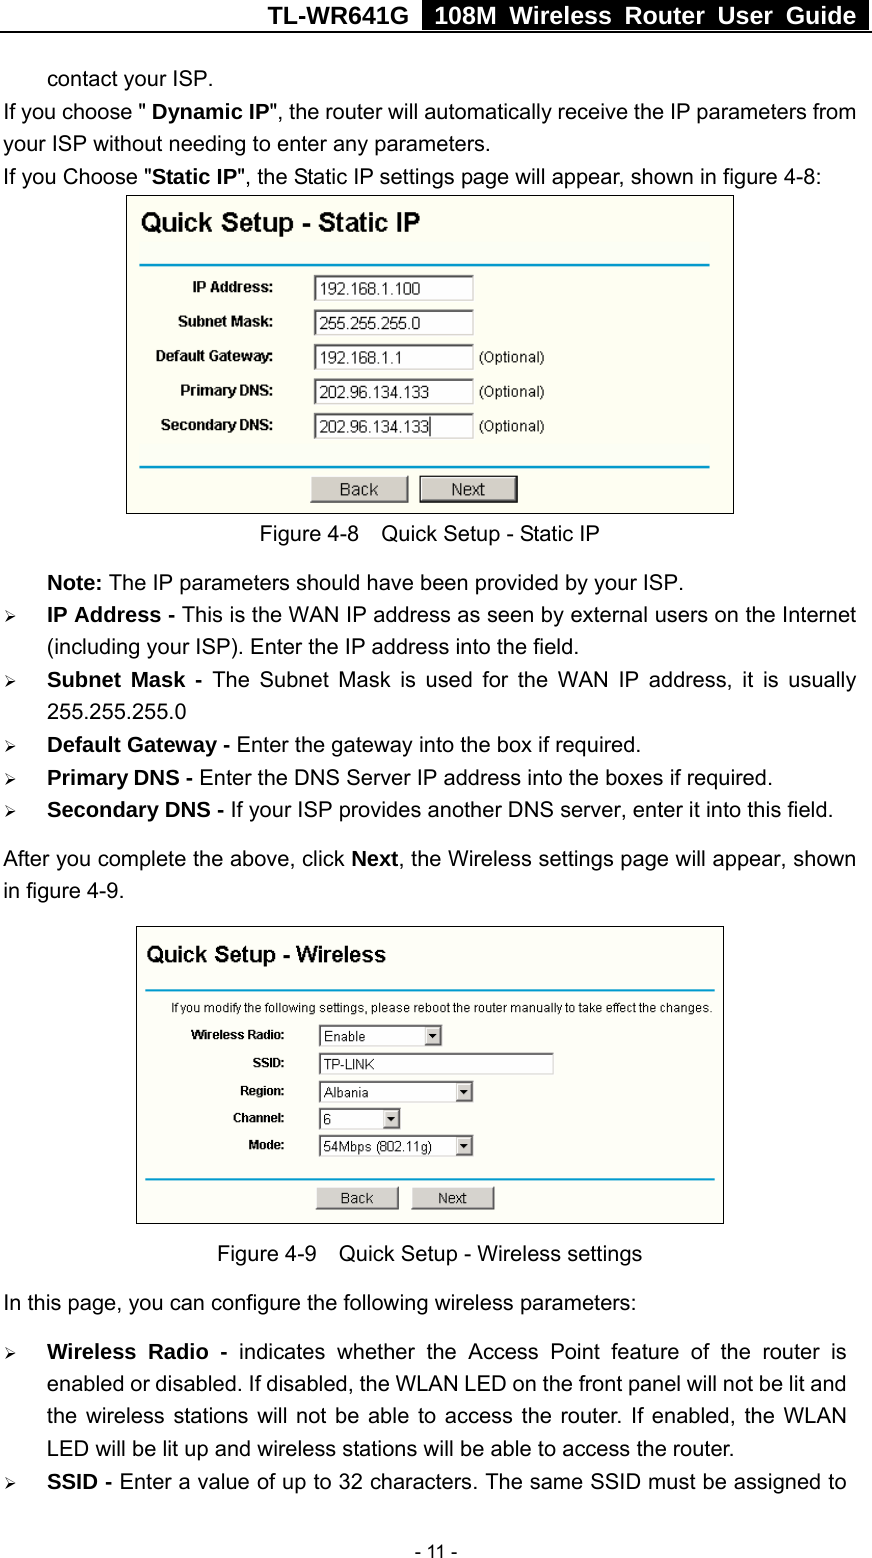 TL-WR641G   108M Wireless Router User Guide   - 11 -contact your ISP. If you choose &quot; Dynamic IP&quot;, the router will automatically receive the IP parameters from your ISP without needing to enter any parameters. If you Choose &quot;Static IP&quot;, the Static IP settings page will appear, shown in figure 4-8:    Figure 4-8    Quick Setup - Static IP  Note: The IP parameters should have been provided by your ISP. ¾ IP Address - This is the WAN IP address as seen by external users on the Internet (including your ISP). Enter the IP address into the field. ¾ Subnet Mask - The Subnet Mask is used for the WAN IP address, it is usually 255.255.255.0 ¾ Default Gateway - Enter the gateway into the box if required. ¾ Primary DNS - Enter the DNS Server IP address into the boxes if required. ¾ Secondary DNS - If your ISP provides another DNS server, enter it into this field. After you complete the above, click Next, the Wireless settings page will appear, shown in figure 4-9.  Figure 4-9    Quick Setup - Wireless settings In this page, you can configure the following wireless parameters: ¾ Wireless Radio - indicates whether the Access Point feature of the router is enabled or disabled. If disabled, the WLAN LED on the front panel will not be lit and the wireless stations will not be able to access the router. If enabled, the WLAN LED will be lit up and wireless stations will be able to access the router. ¾ SSID - Enter a value of up to 32 characters. The same SSID must be assigned to 